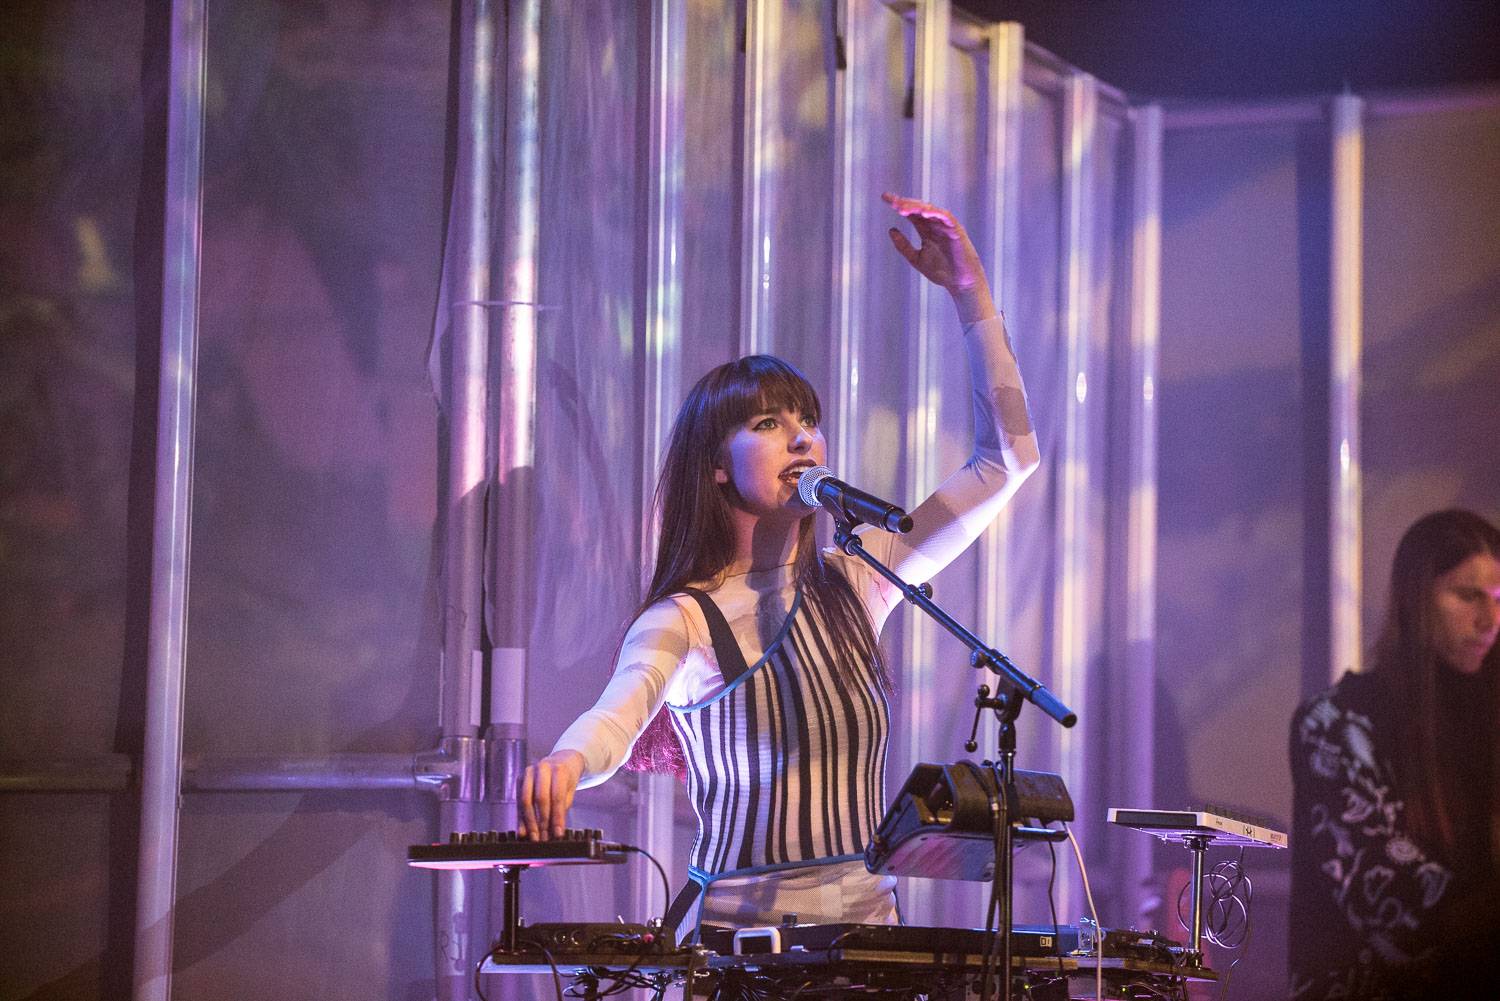 Kimbra at the Imperial, Vancouver, Feb 9 2018. Pavel Boiko photo.